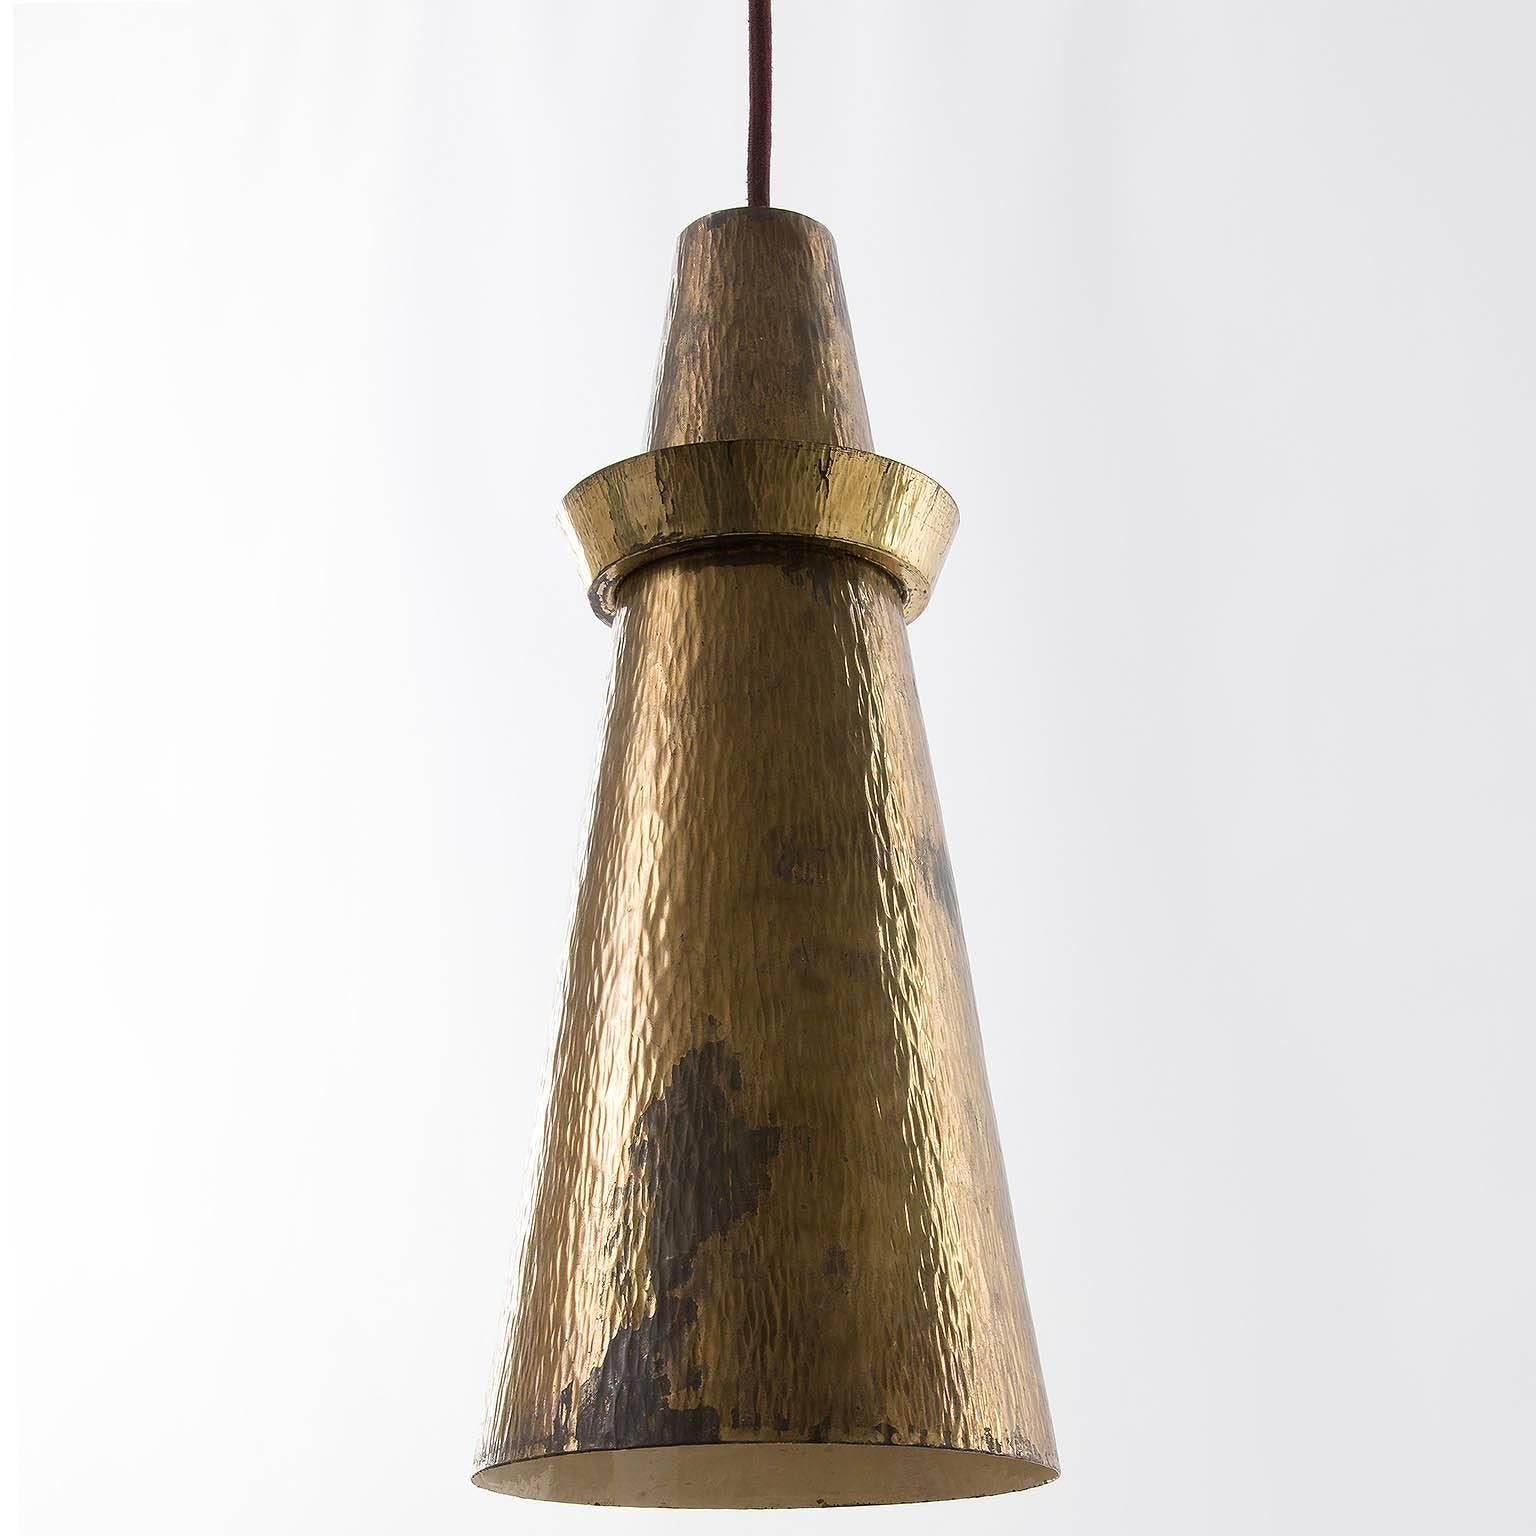 Italian One of Six Pendant Lights, Hammered Patinated Brass, 1960s For Sale